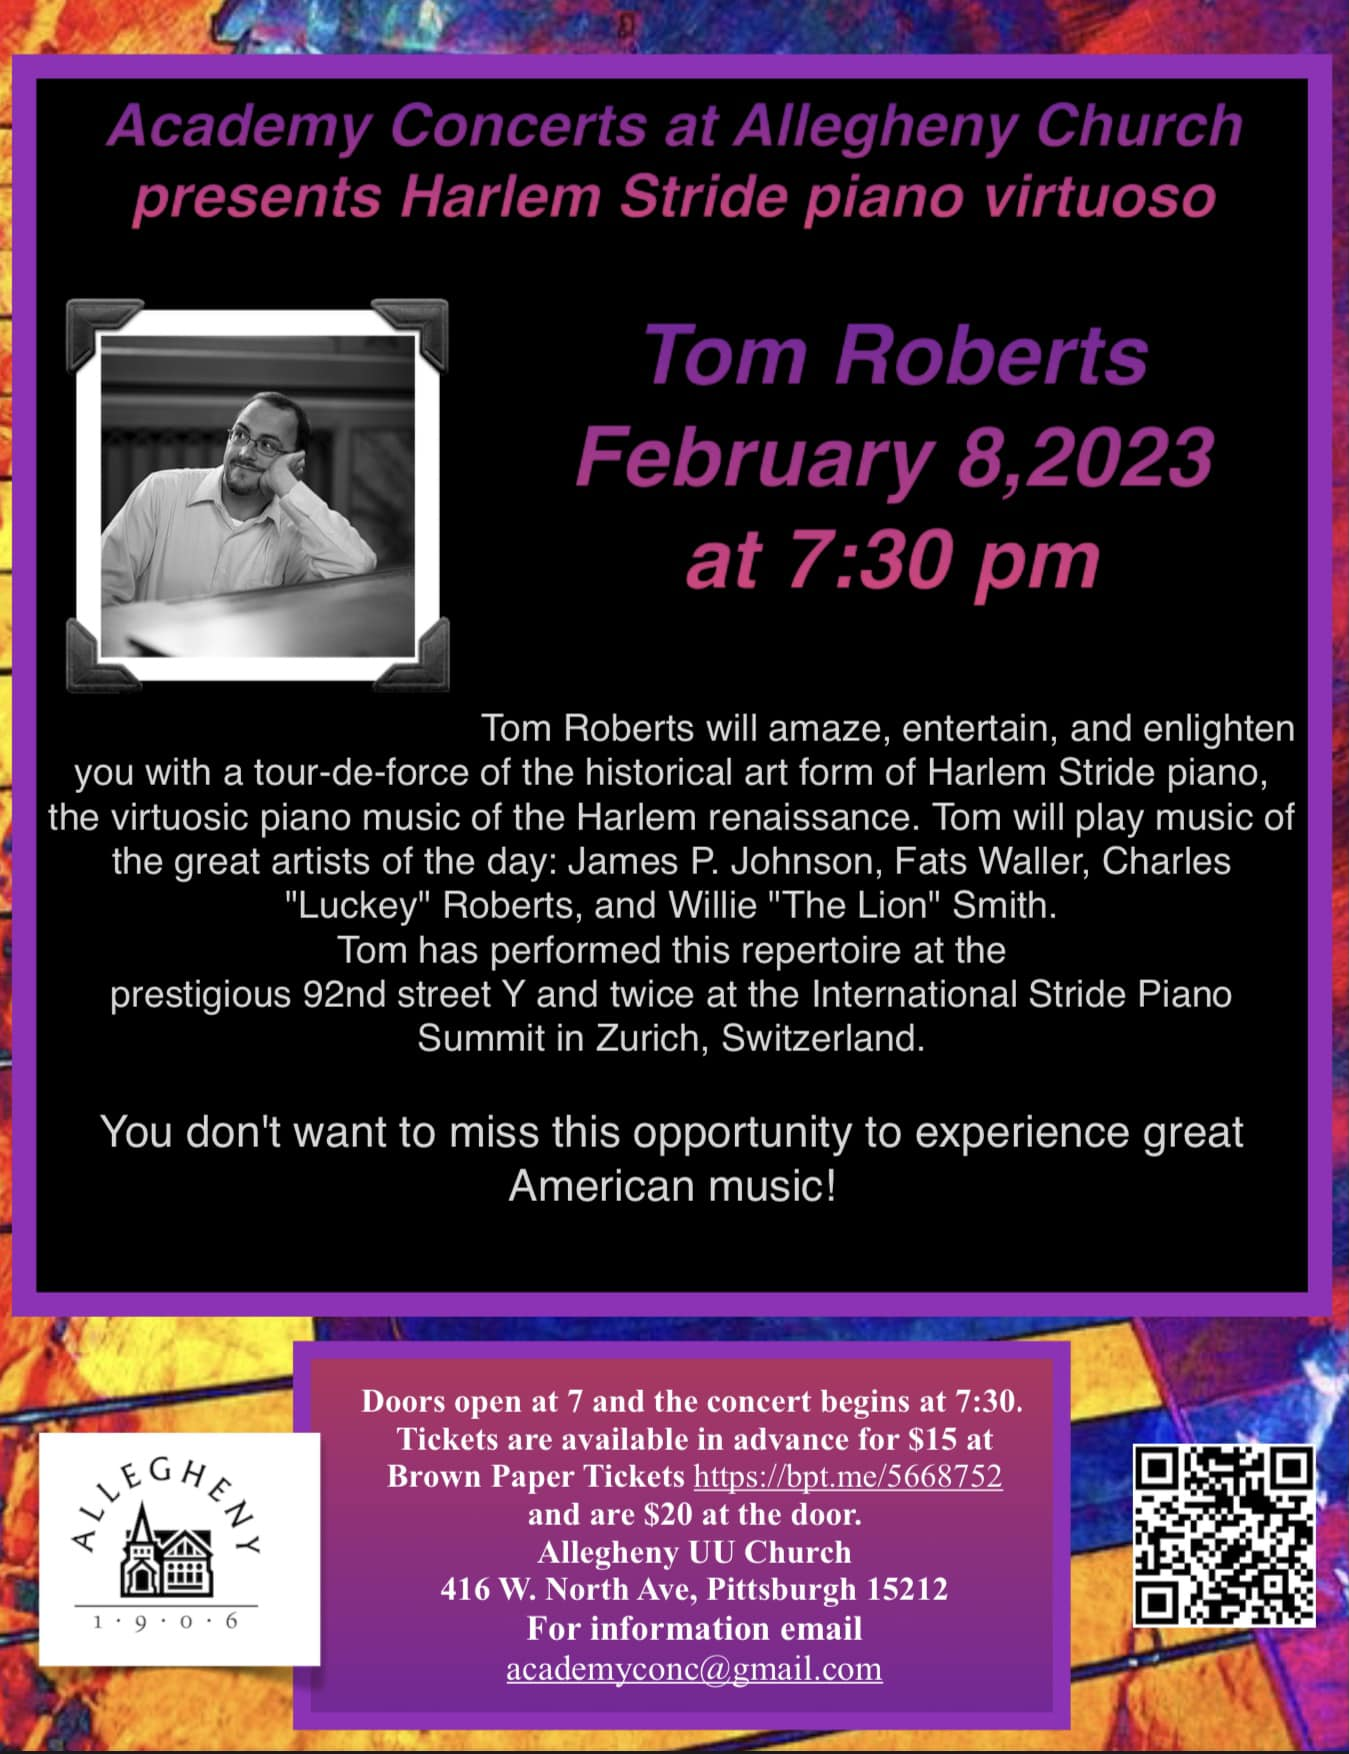 Academy Concerts poster promoting Tom Roberts concert February 8, 2023 Allegheny UU Church